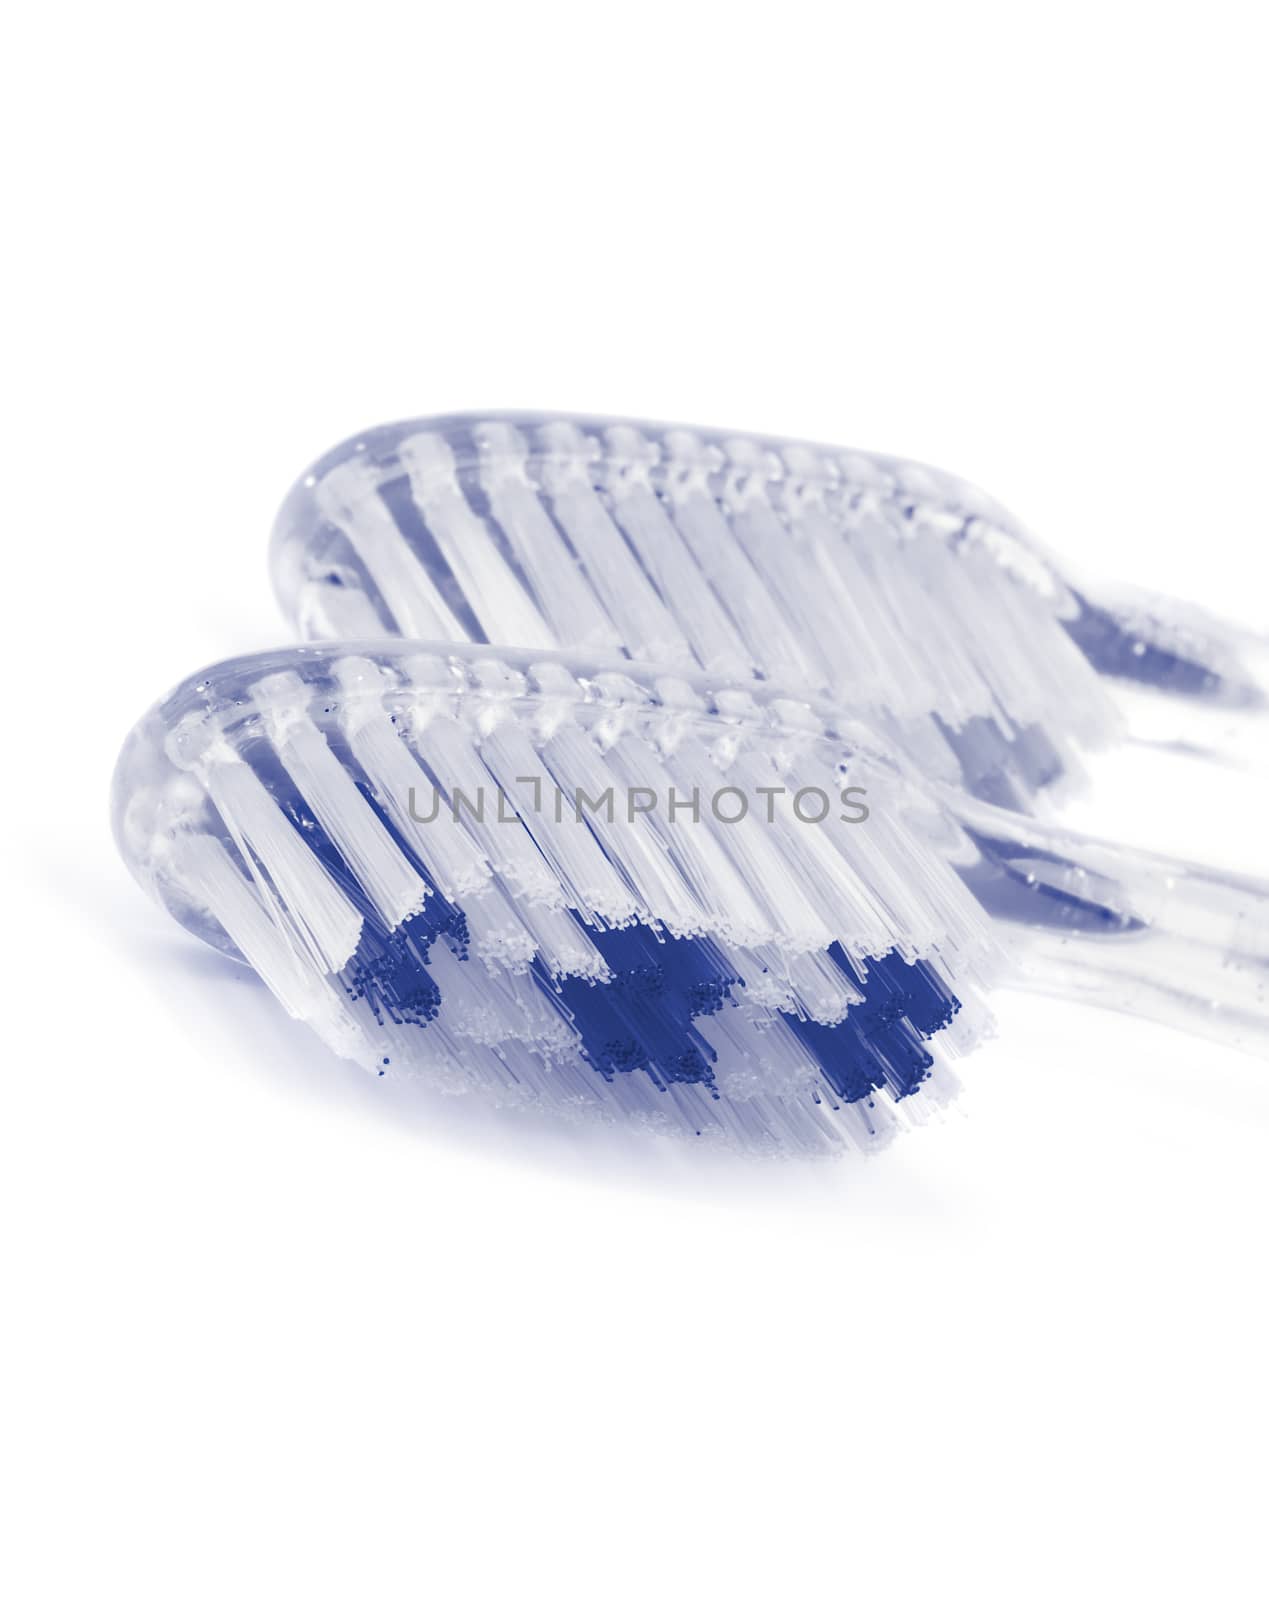 Two Transparent Toothbrushes isolated on white background. Monochrome Purple View